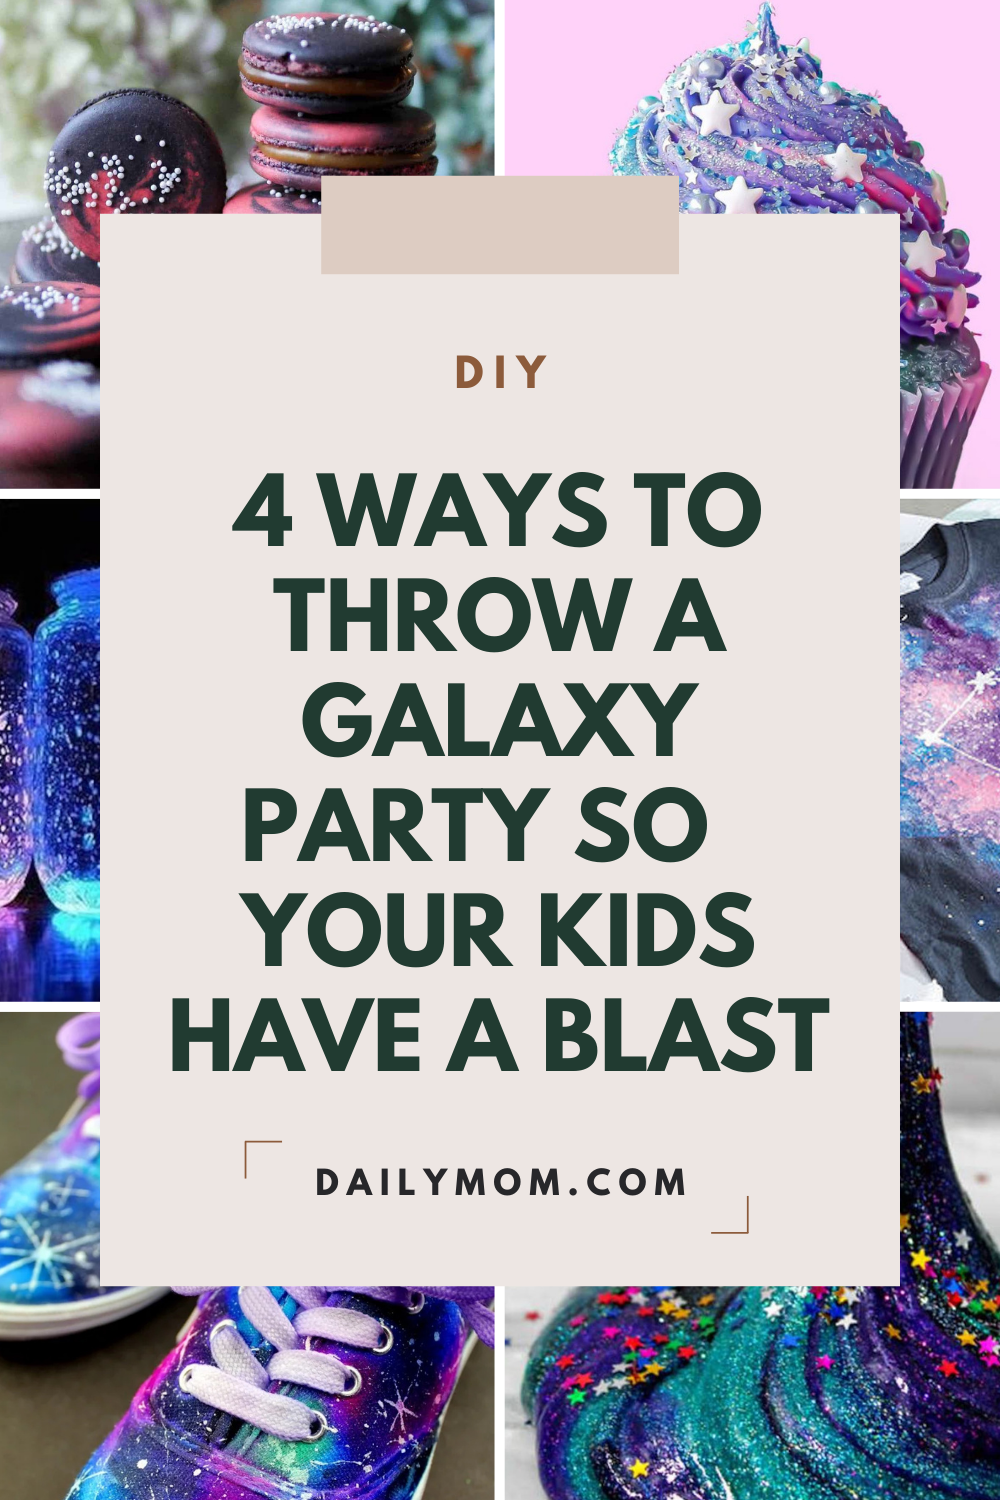 4 Creative Ways To Throw A Galaxy Party So Your Kids Have A Blast